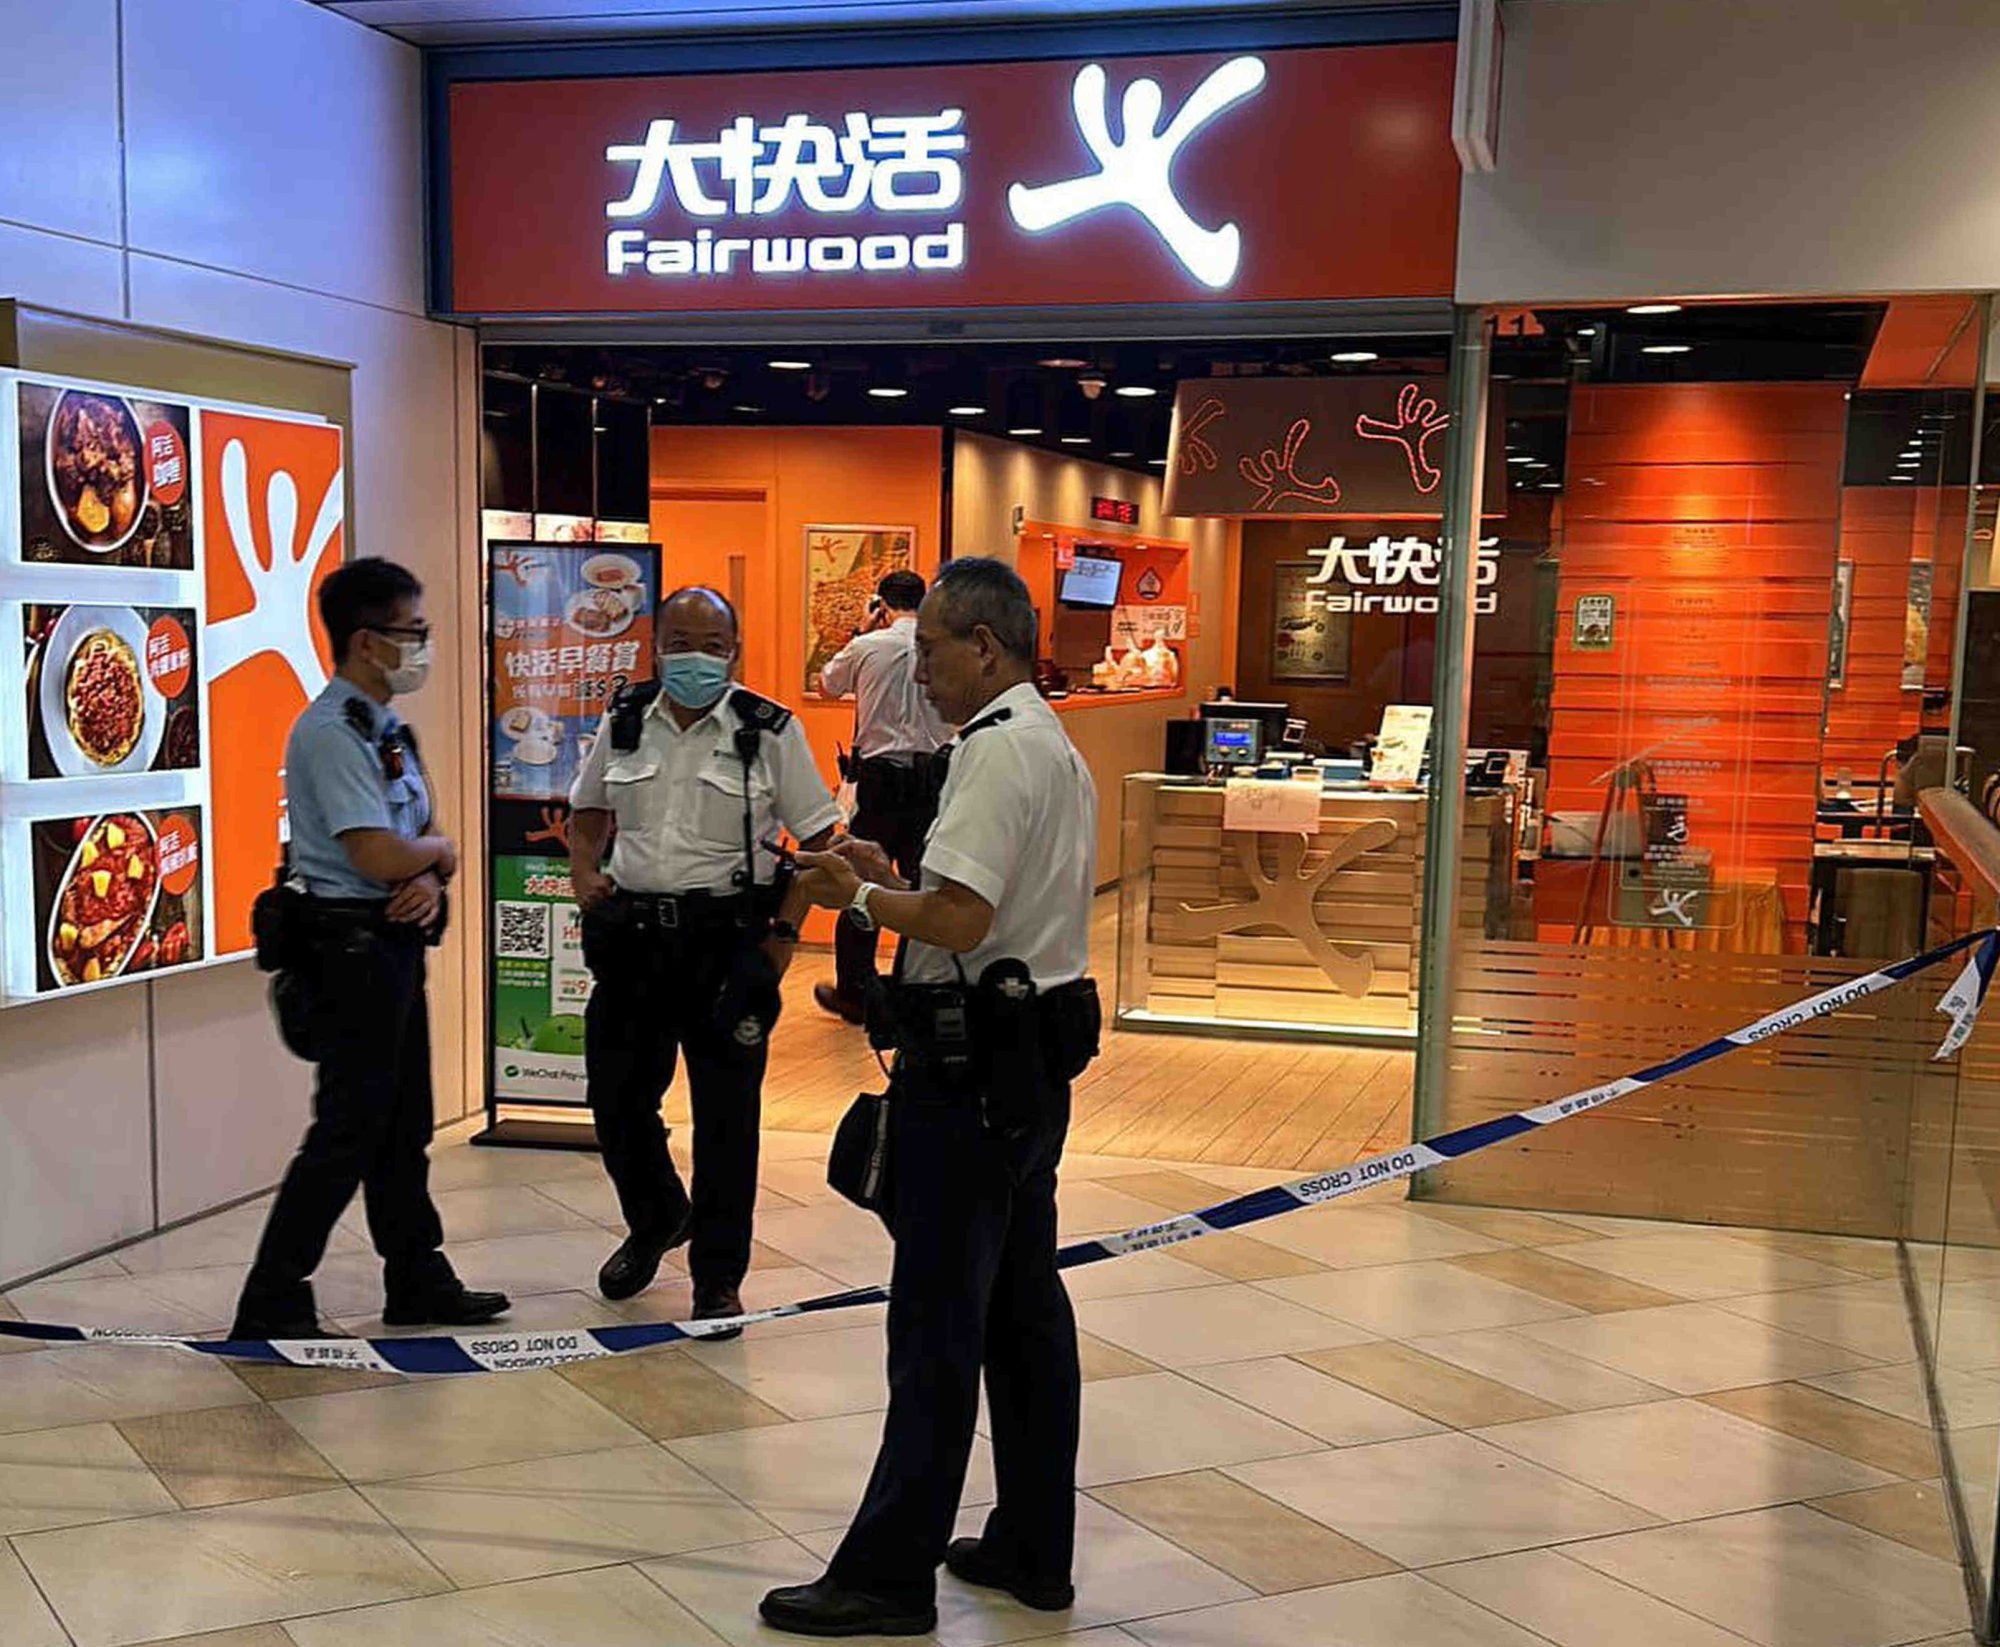 A Fairwood outlet in Sha Tin’s Shui Chuen O Plaza was the scene of the attack. Photo: Handout